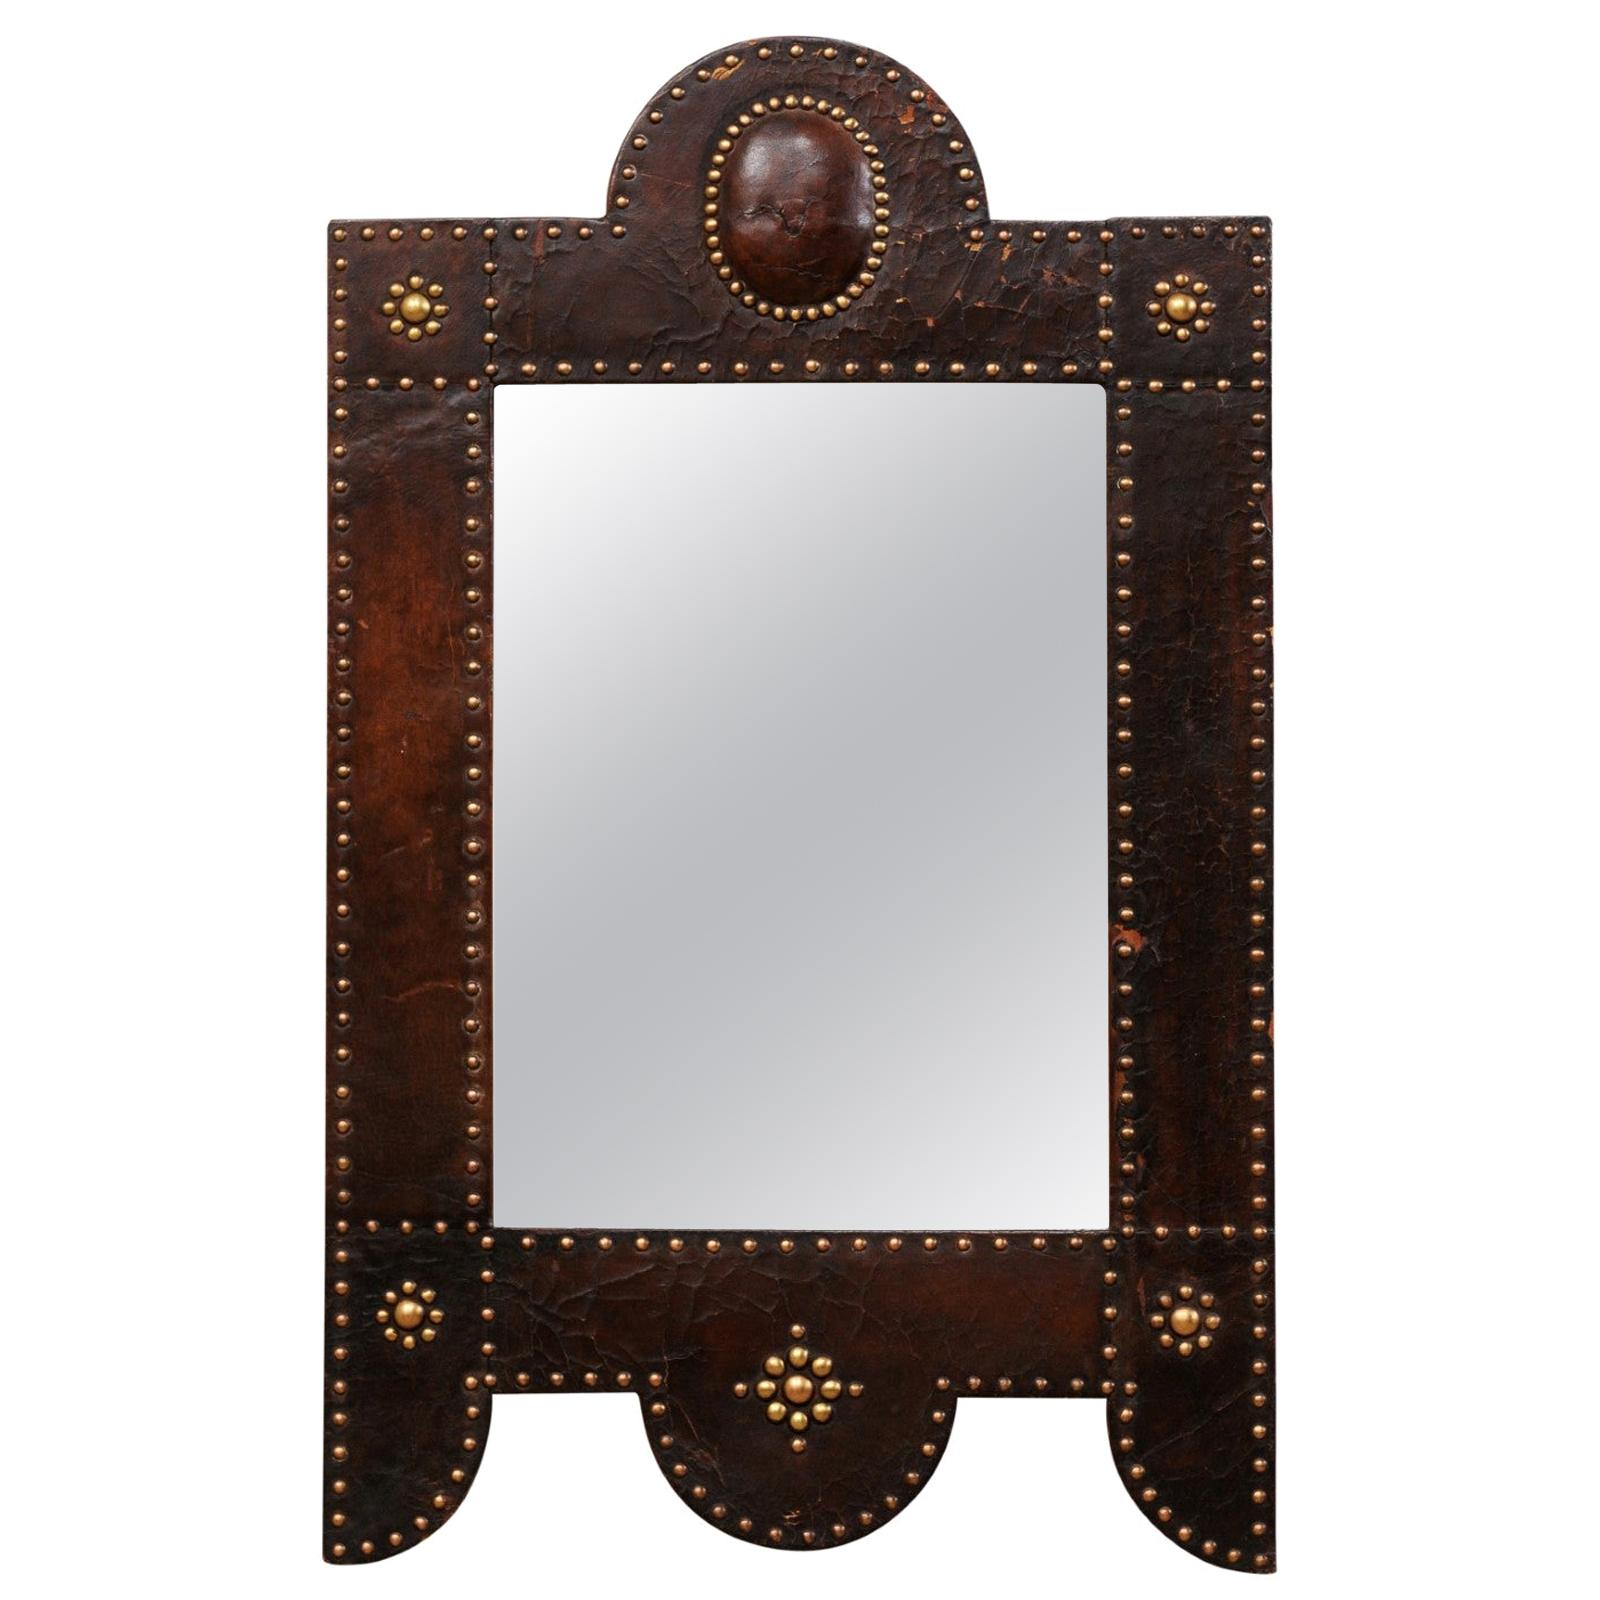 Spanish Leather Wrapped Mirror with Brass Nail-Head Accents, Mid to Late 19th C.